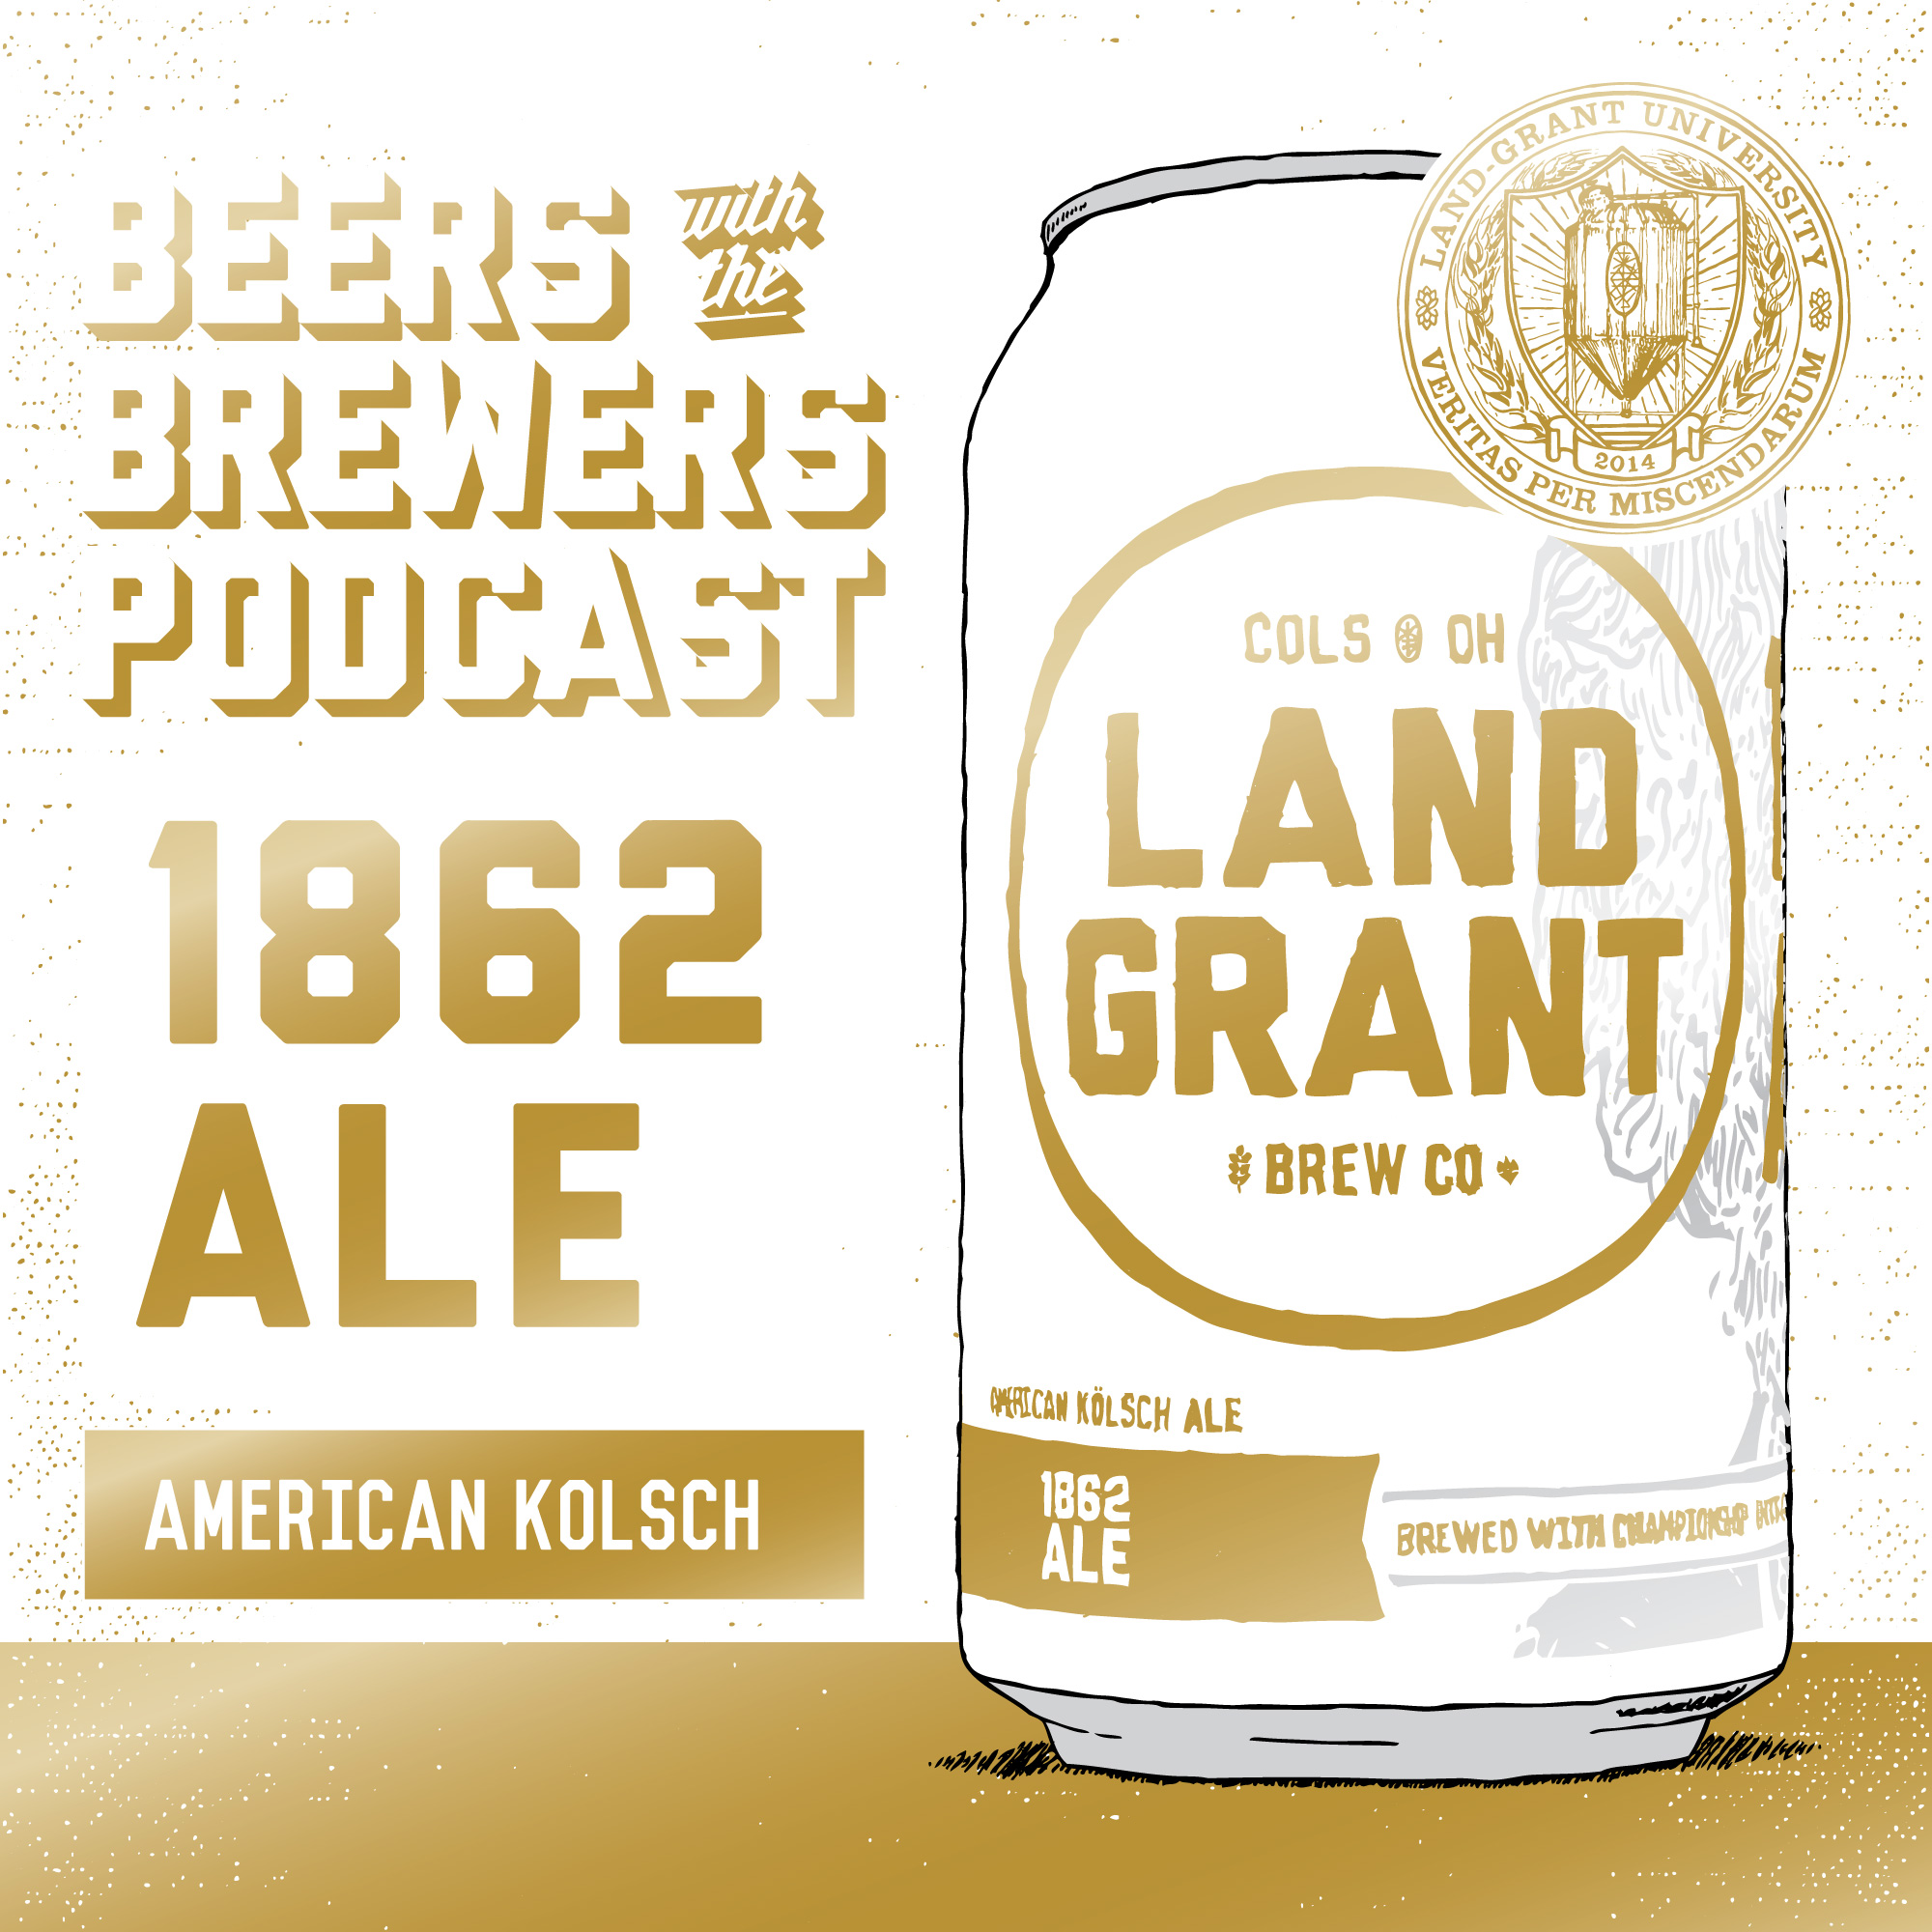 1862 Ale - American Kolsch - Beers with the Brewers